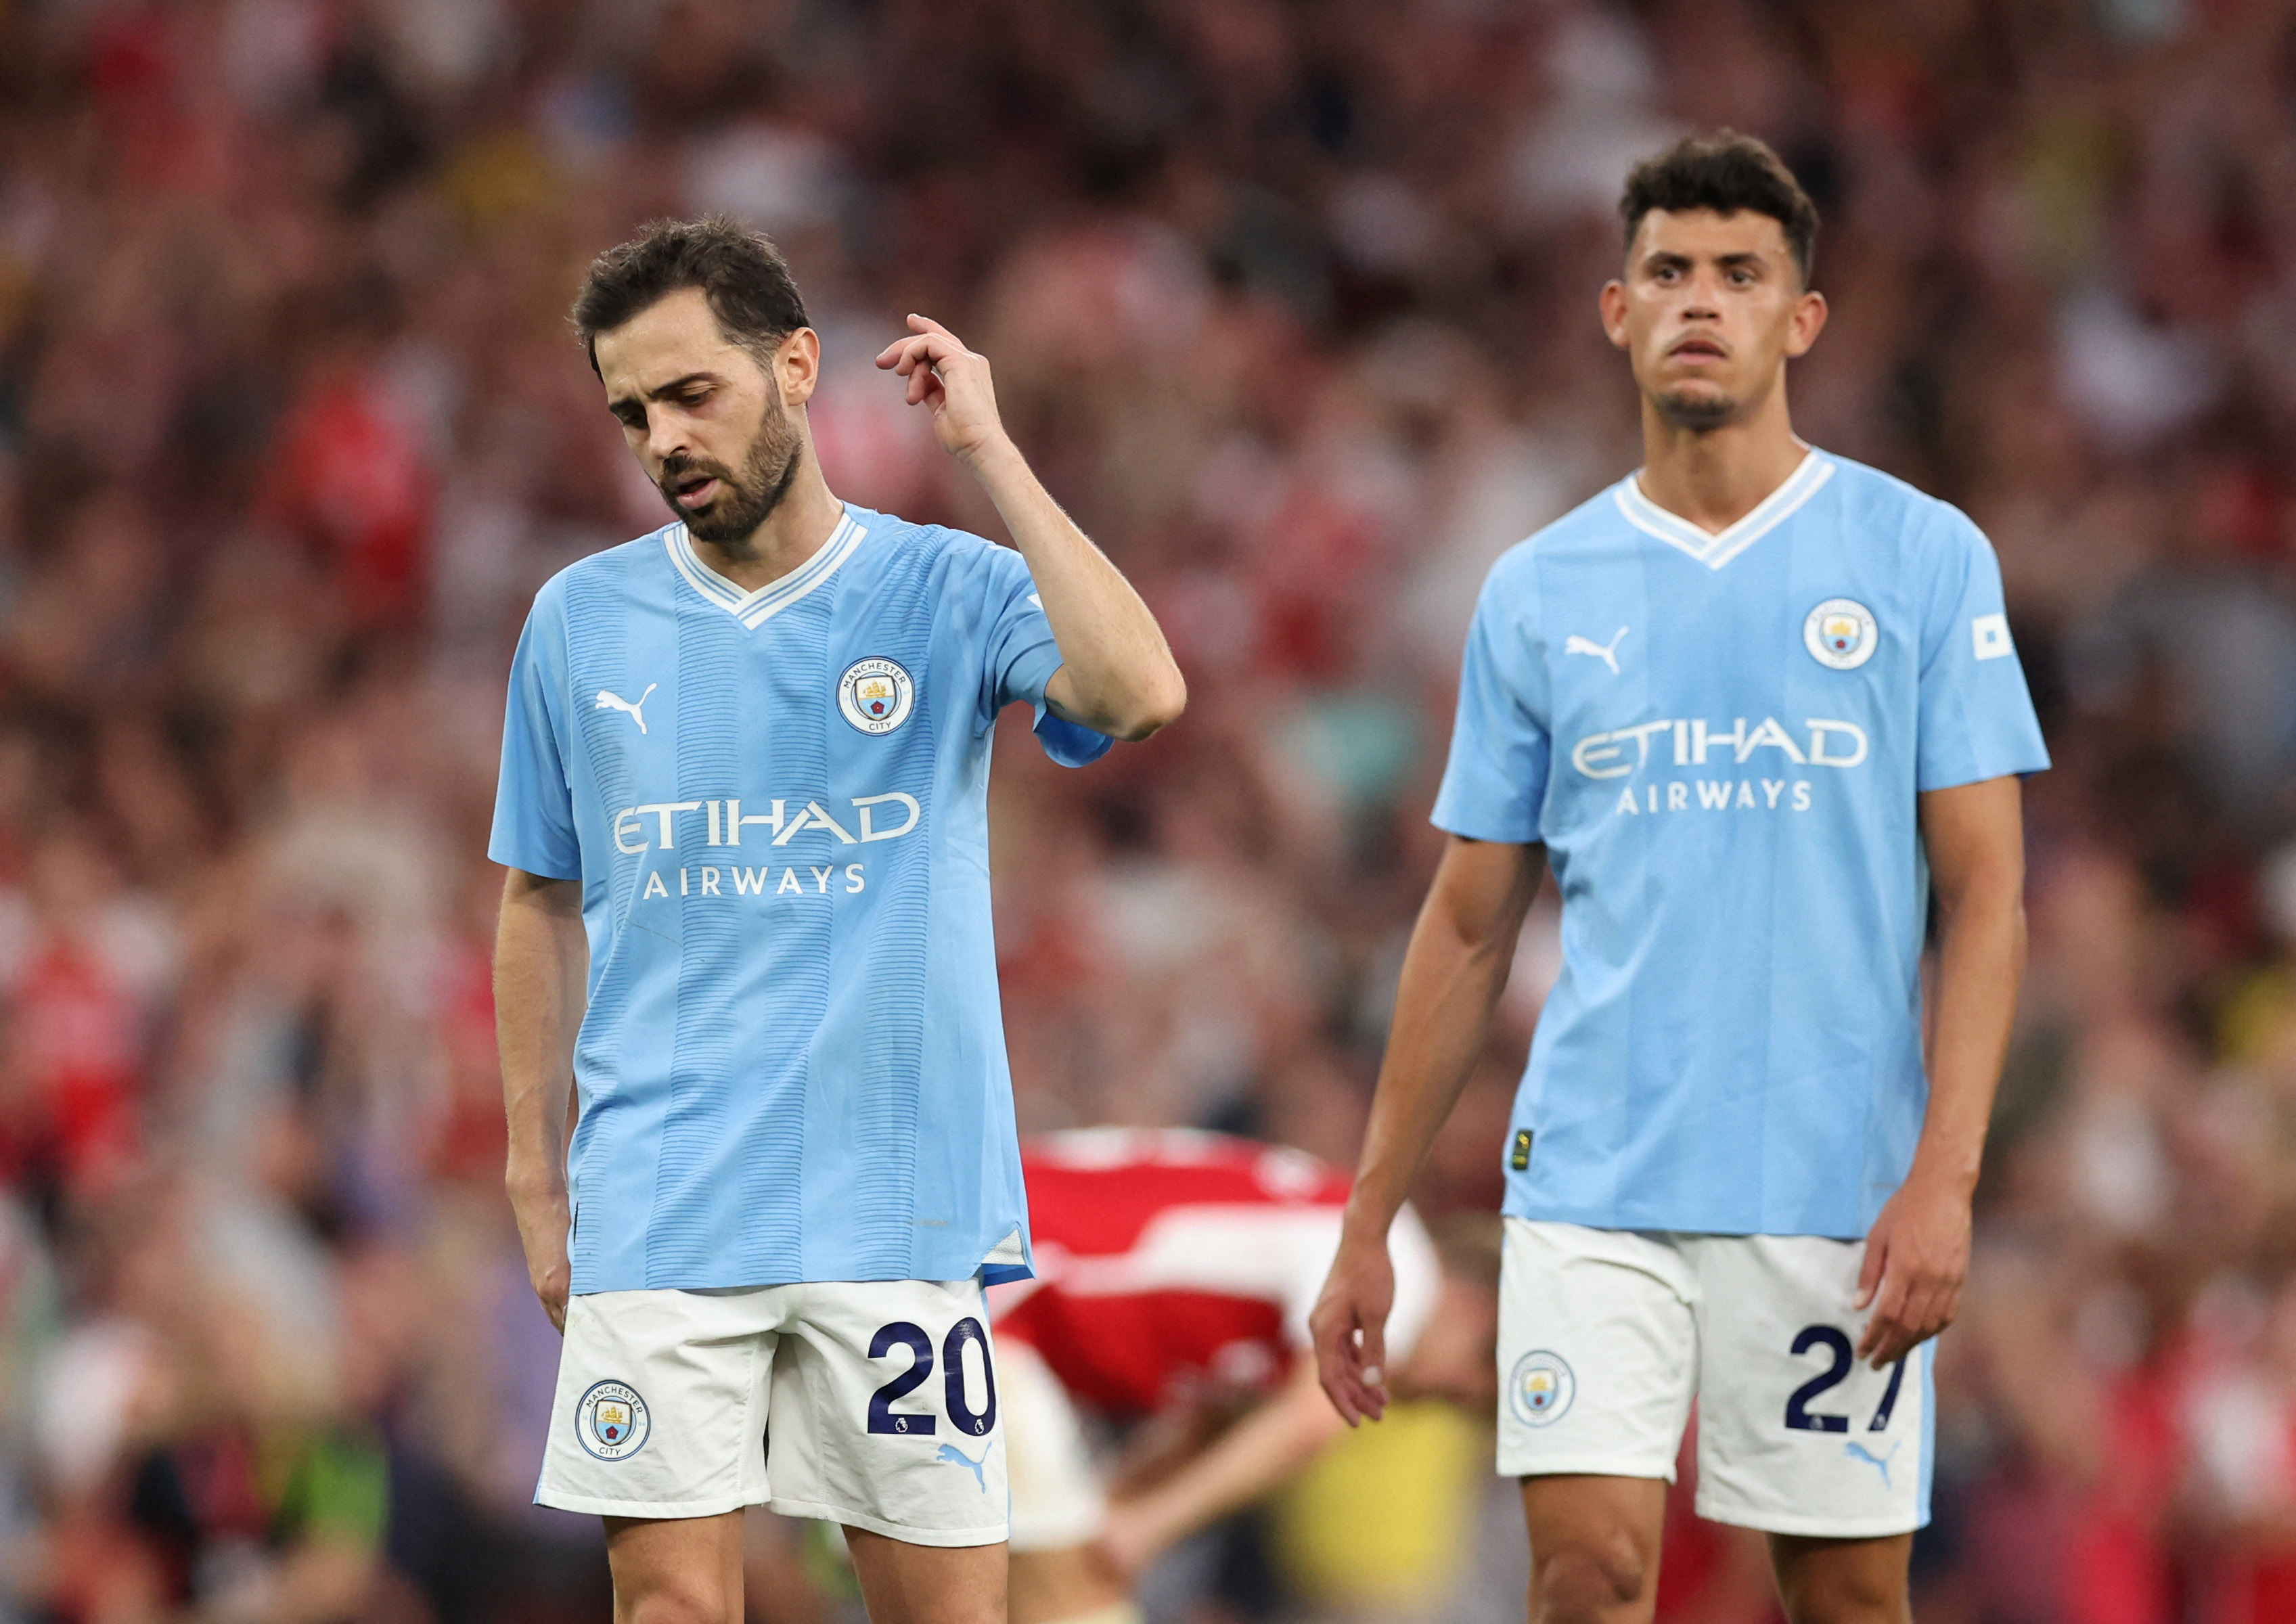 Man City have come back from worse, says Silva, after two losses | Reuters